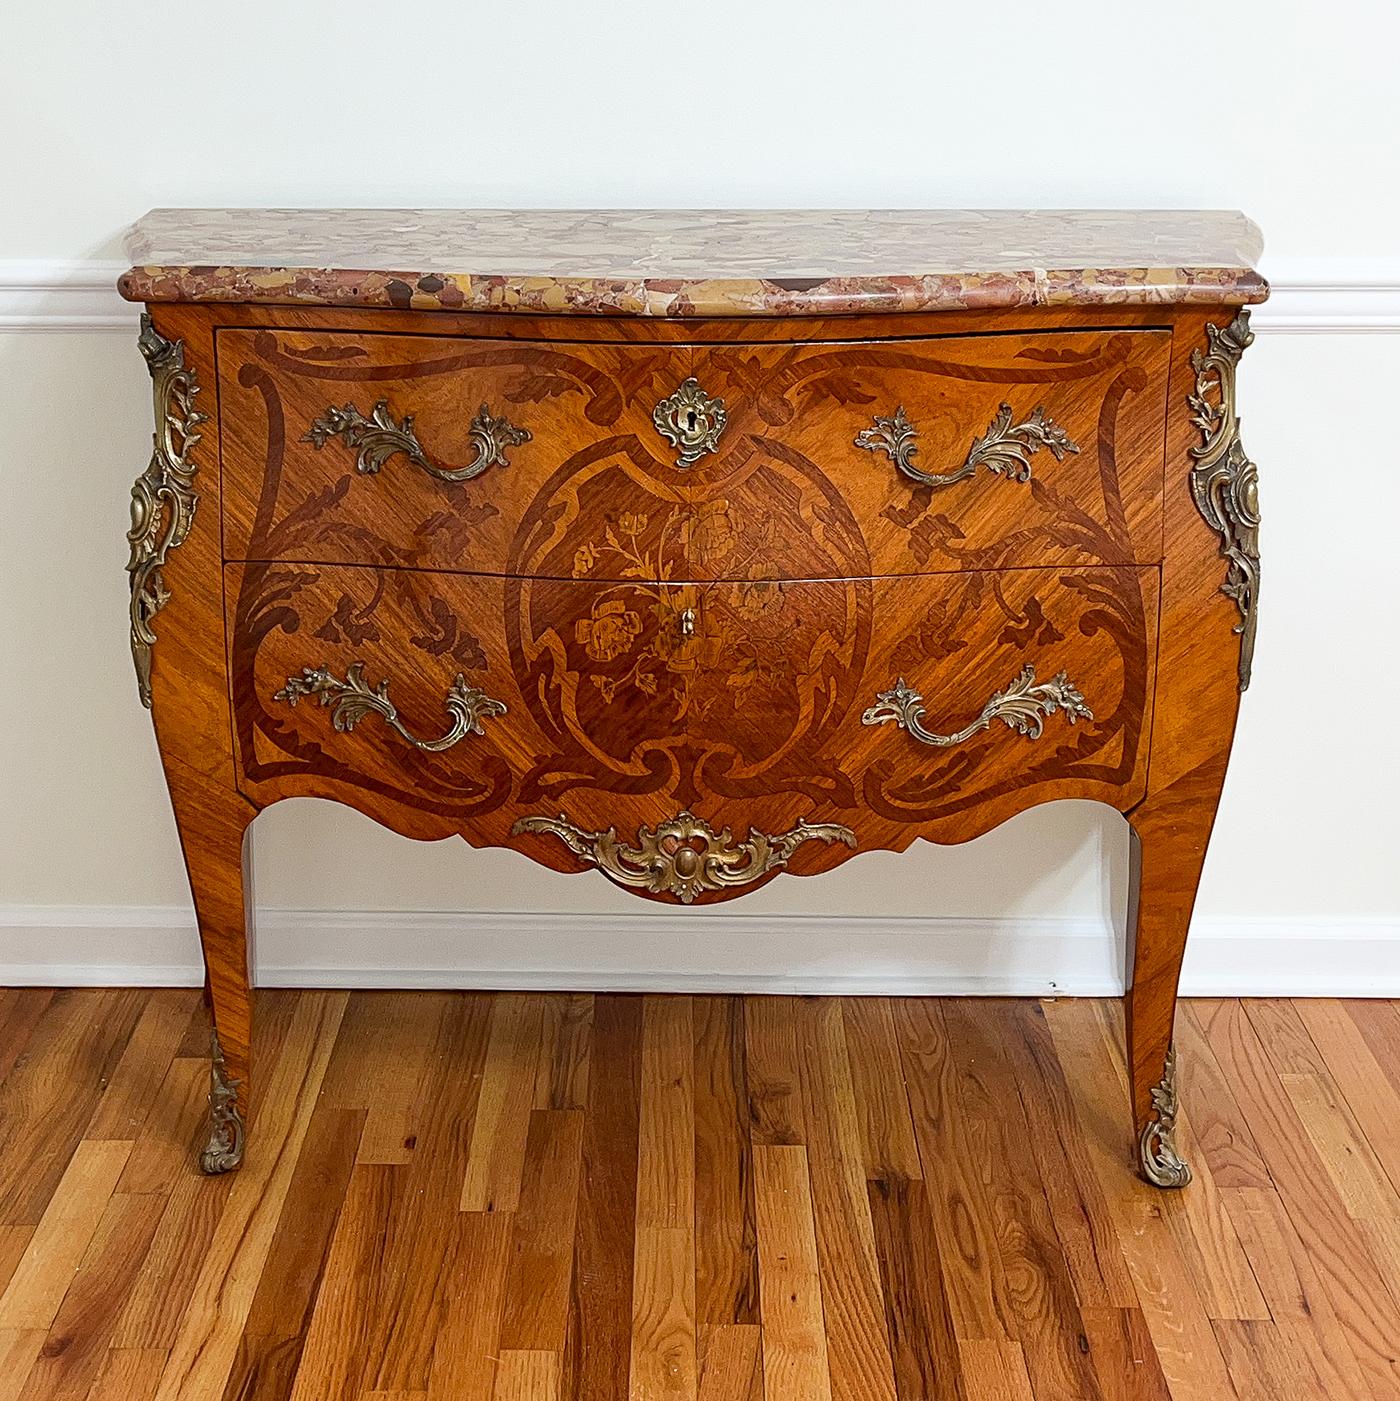 A fine French Louis XV marble top commode with serpentine and bombay form, this commode has Breche D'Alep marble with a molded edge, fine detailed floral marquetry patterns, rococo gilt bronze mounts, and sans traverse drawers. France, Late 19th